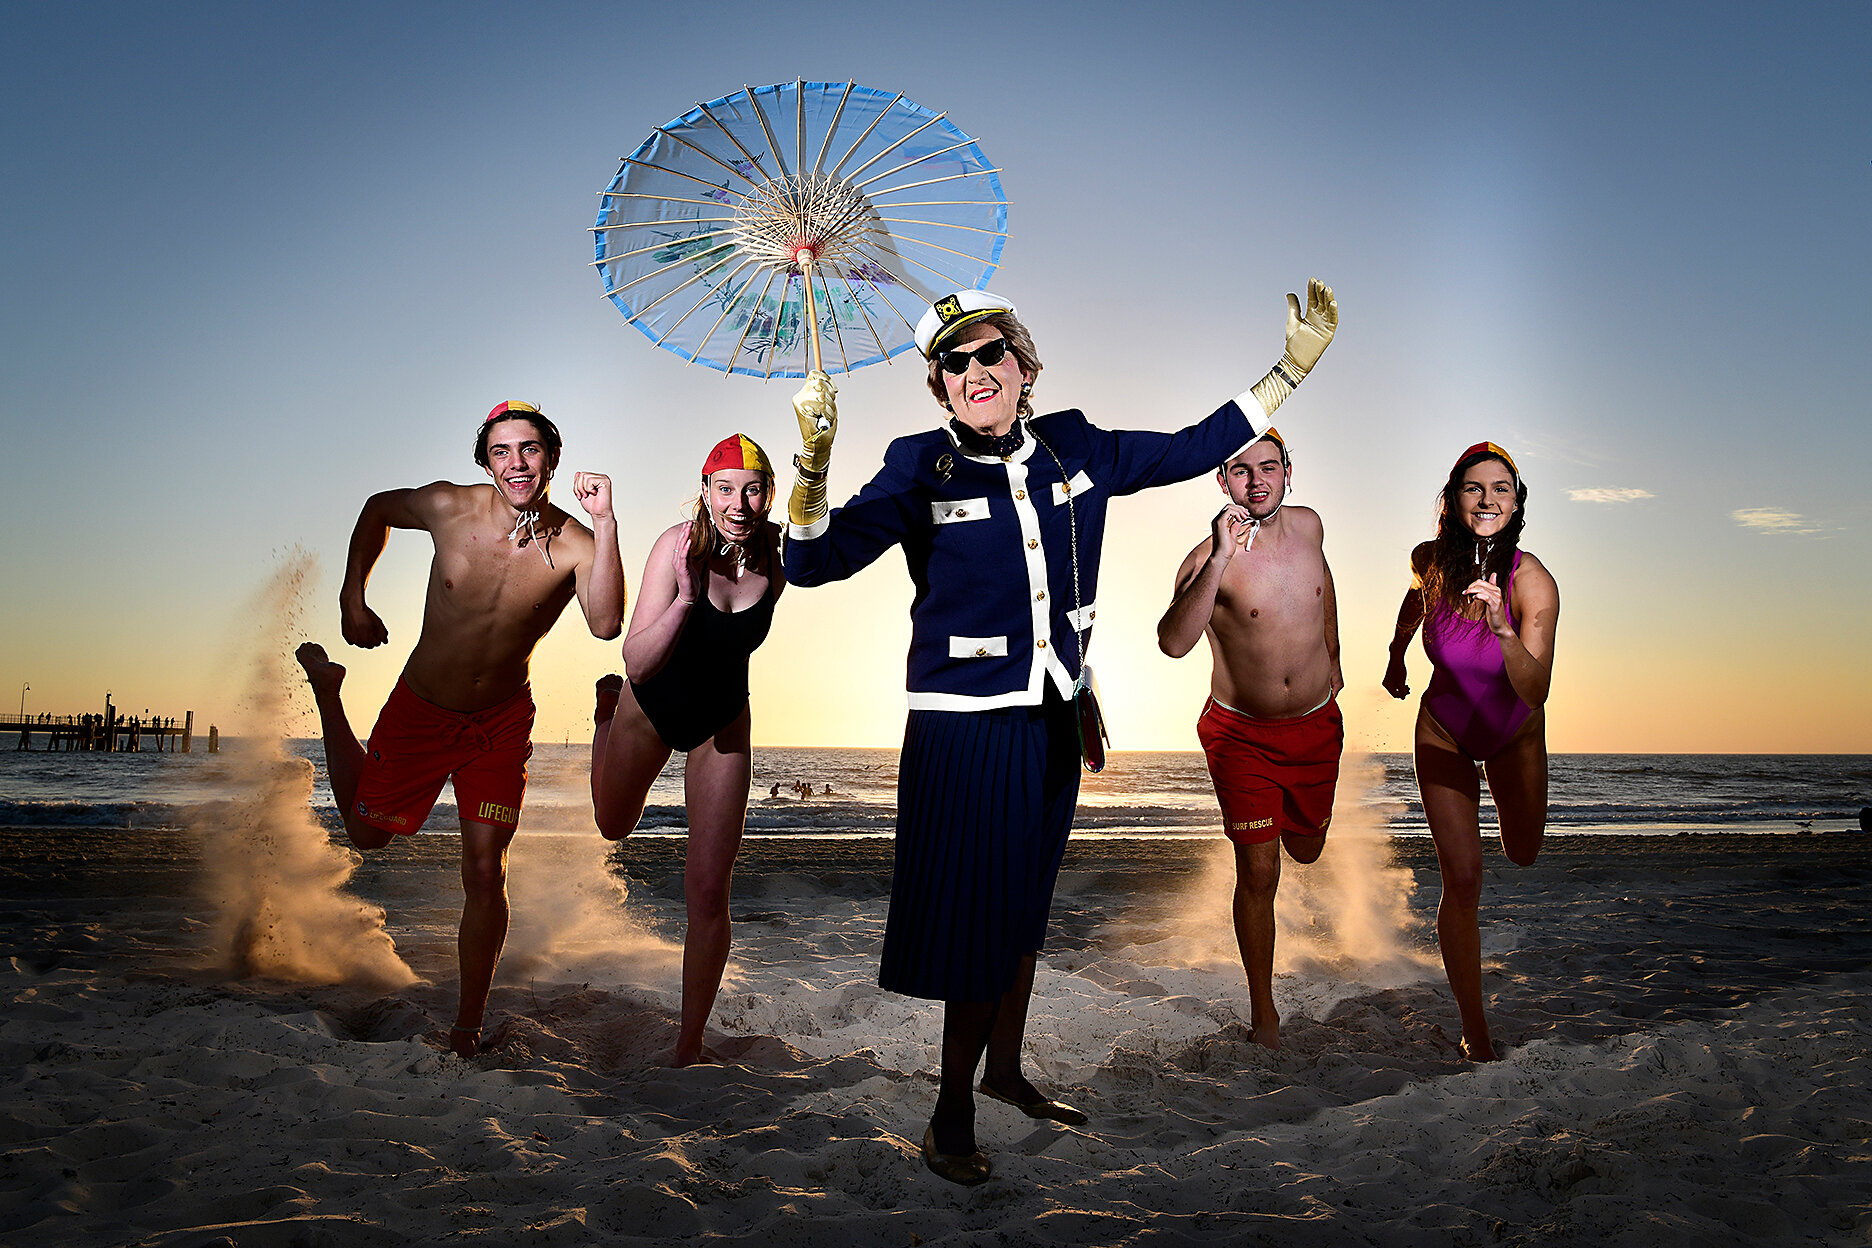  14.9.18 -  Dr. Gertrude Glossip with surf lifesavers Cooper Forest, TJ Walkden, Edward Gates &amp; Brittany Jessup at Glenelg Beach. Dr. Gertrude Glossip is the alter ego of Will Sergeant - Feast Ambassador, who is showcasing his event in the Feast 